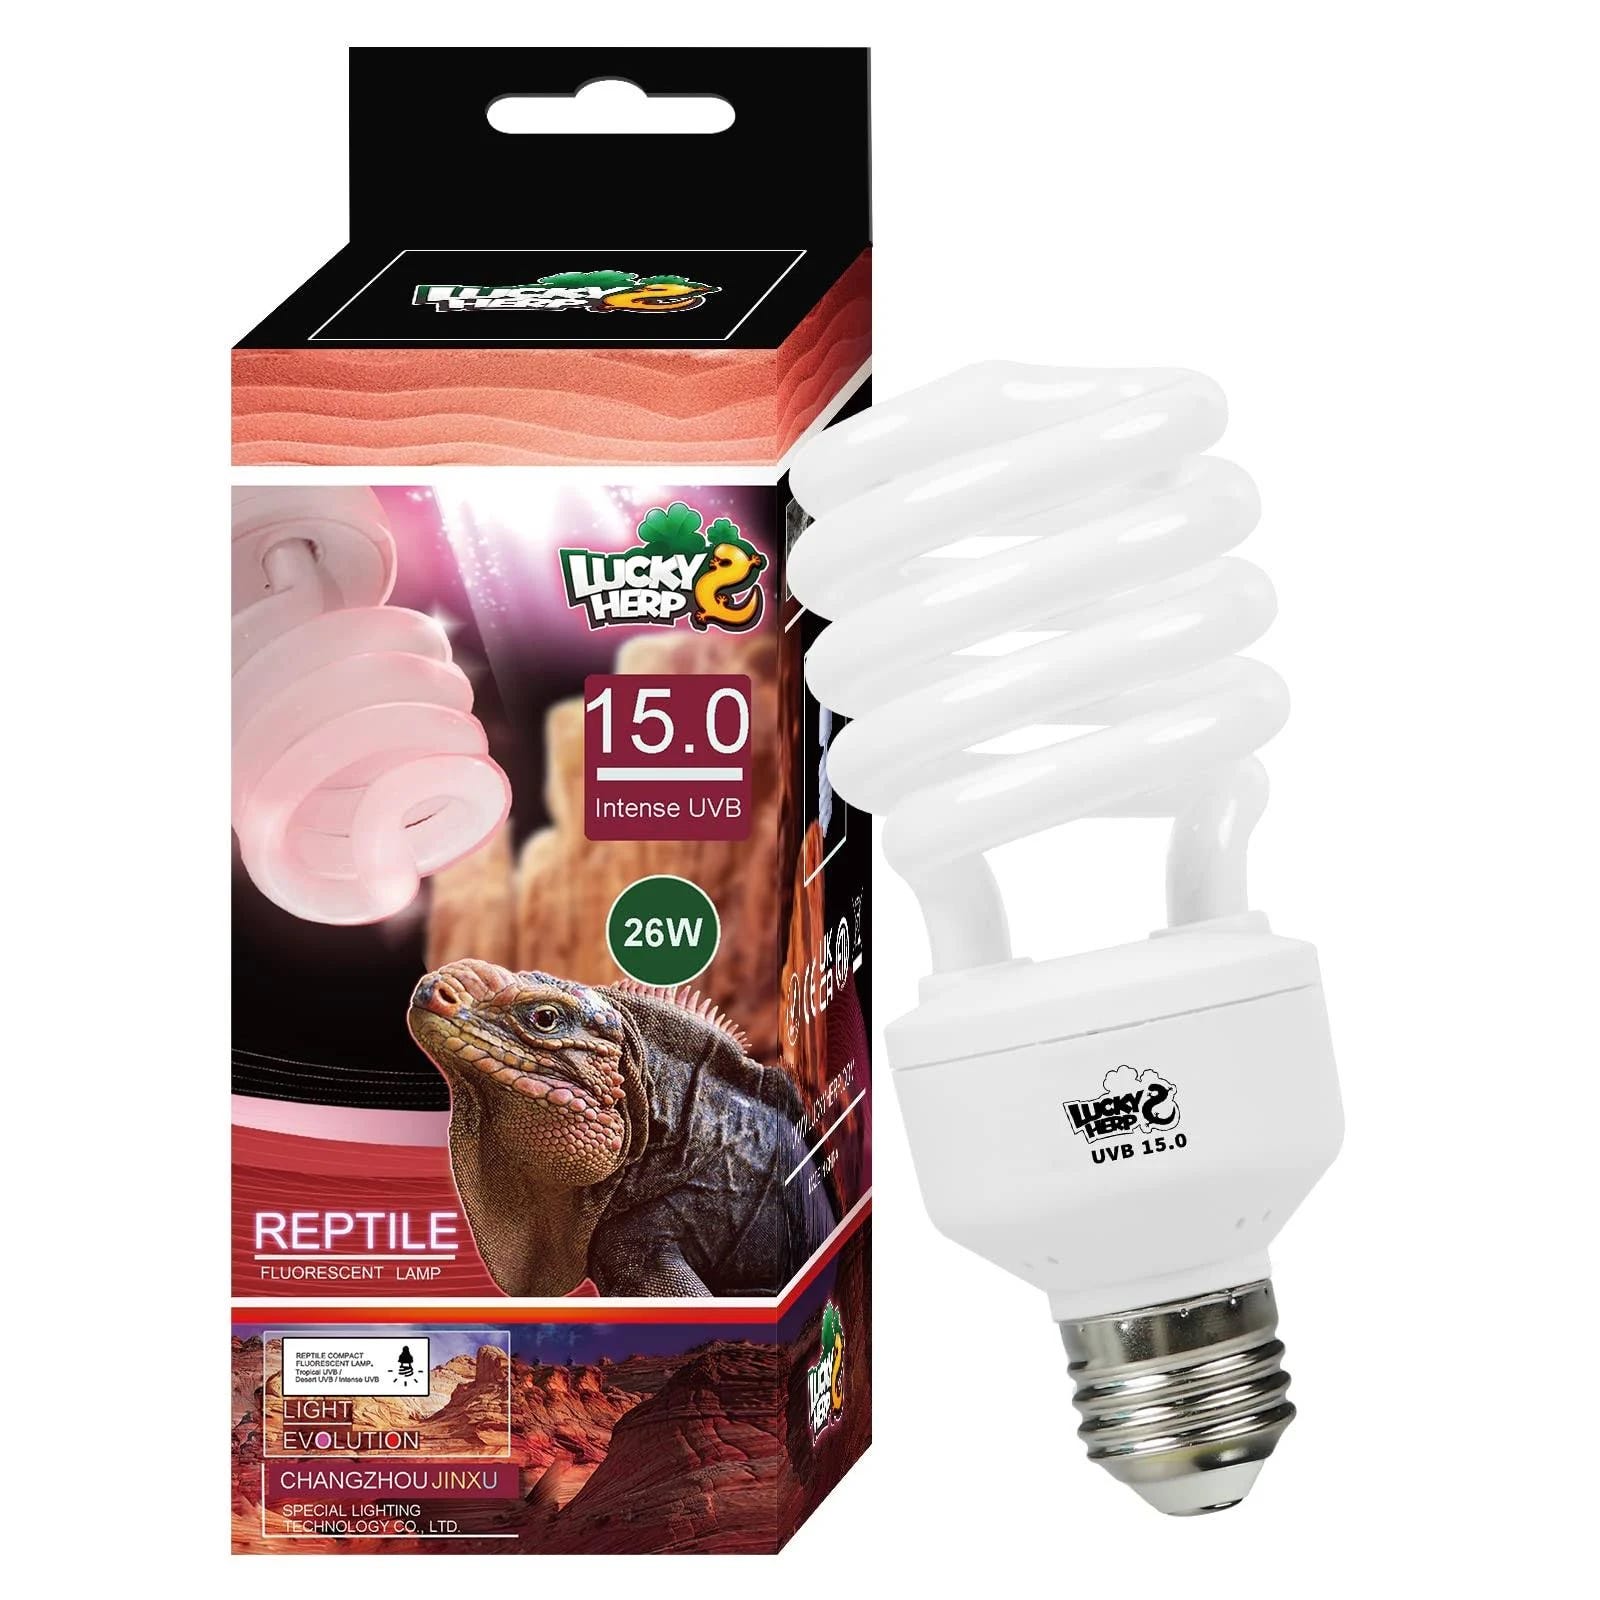 Lucky Herp UVB LED Terrarium Light for Reptiles and Amphibians | Image